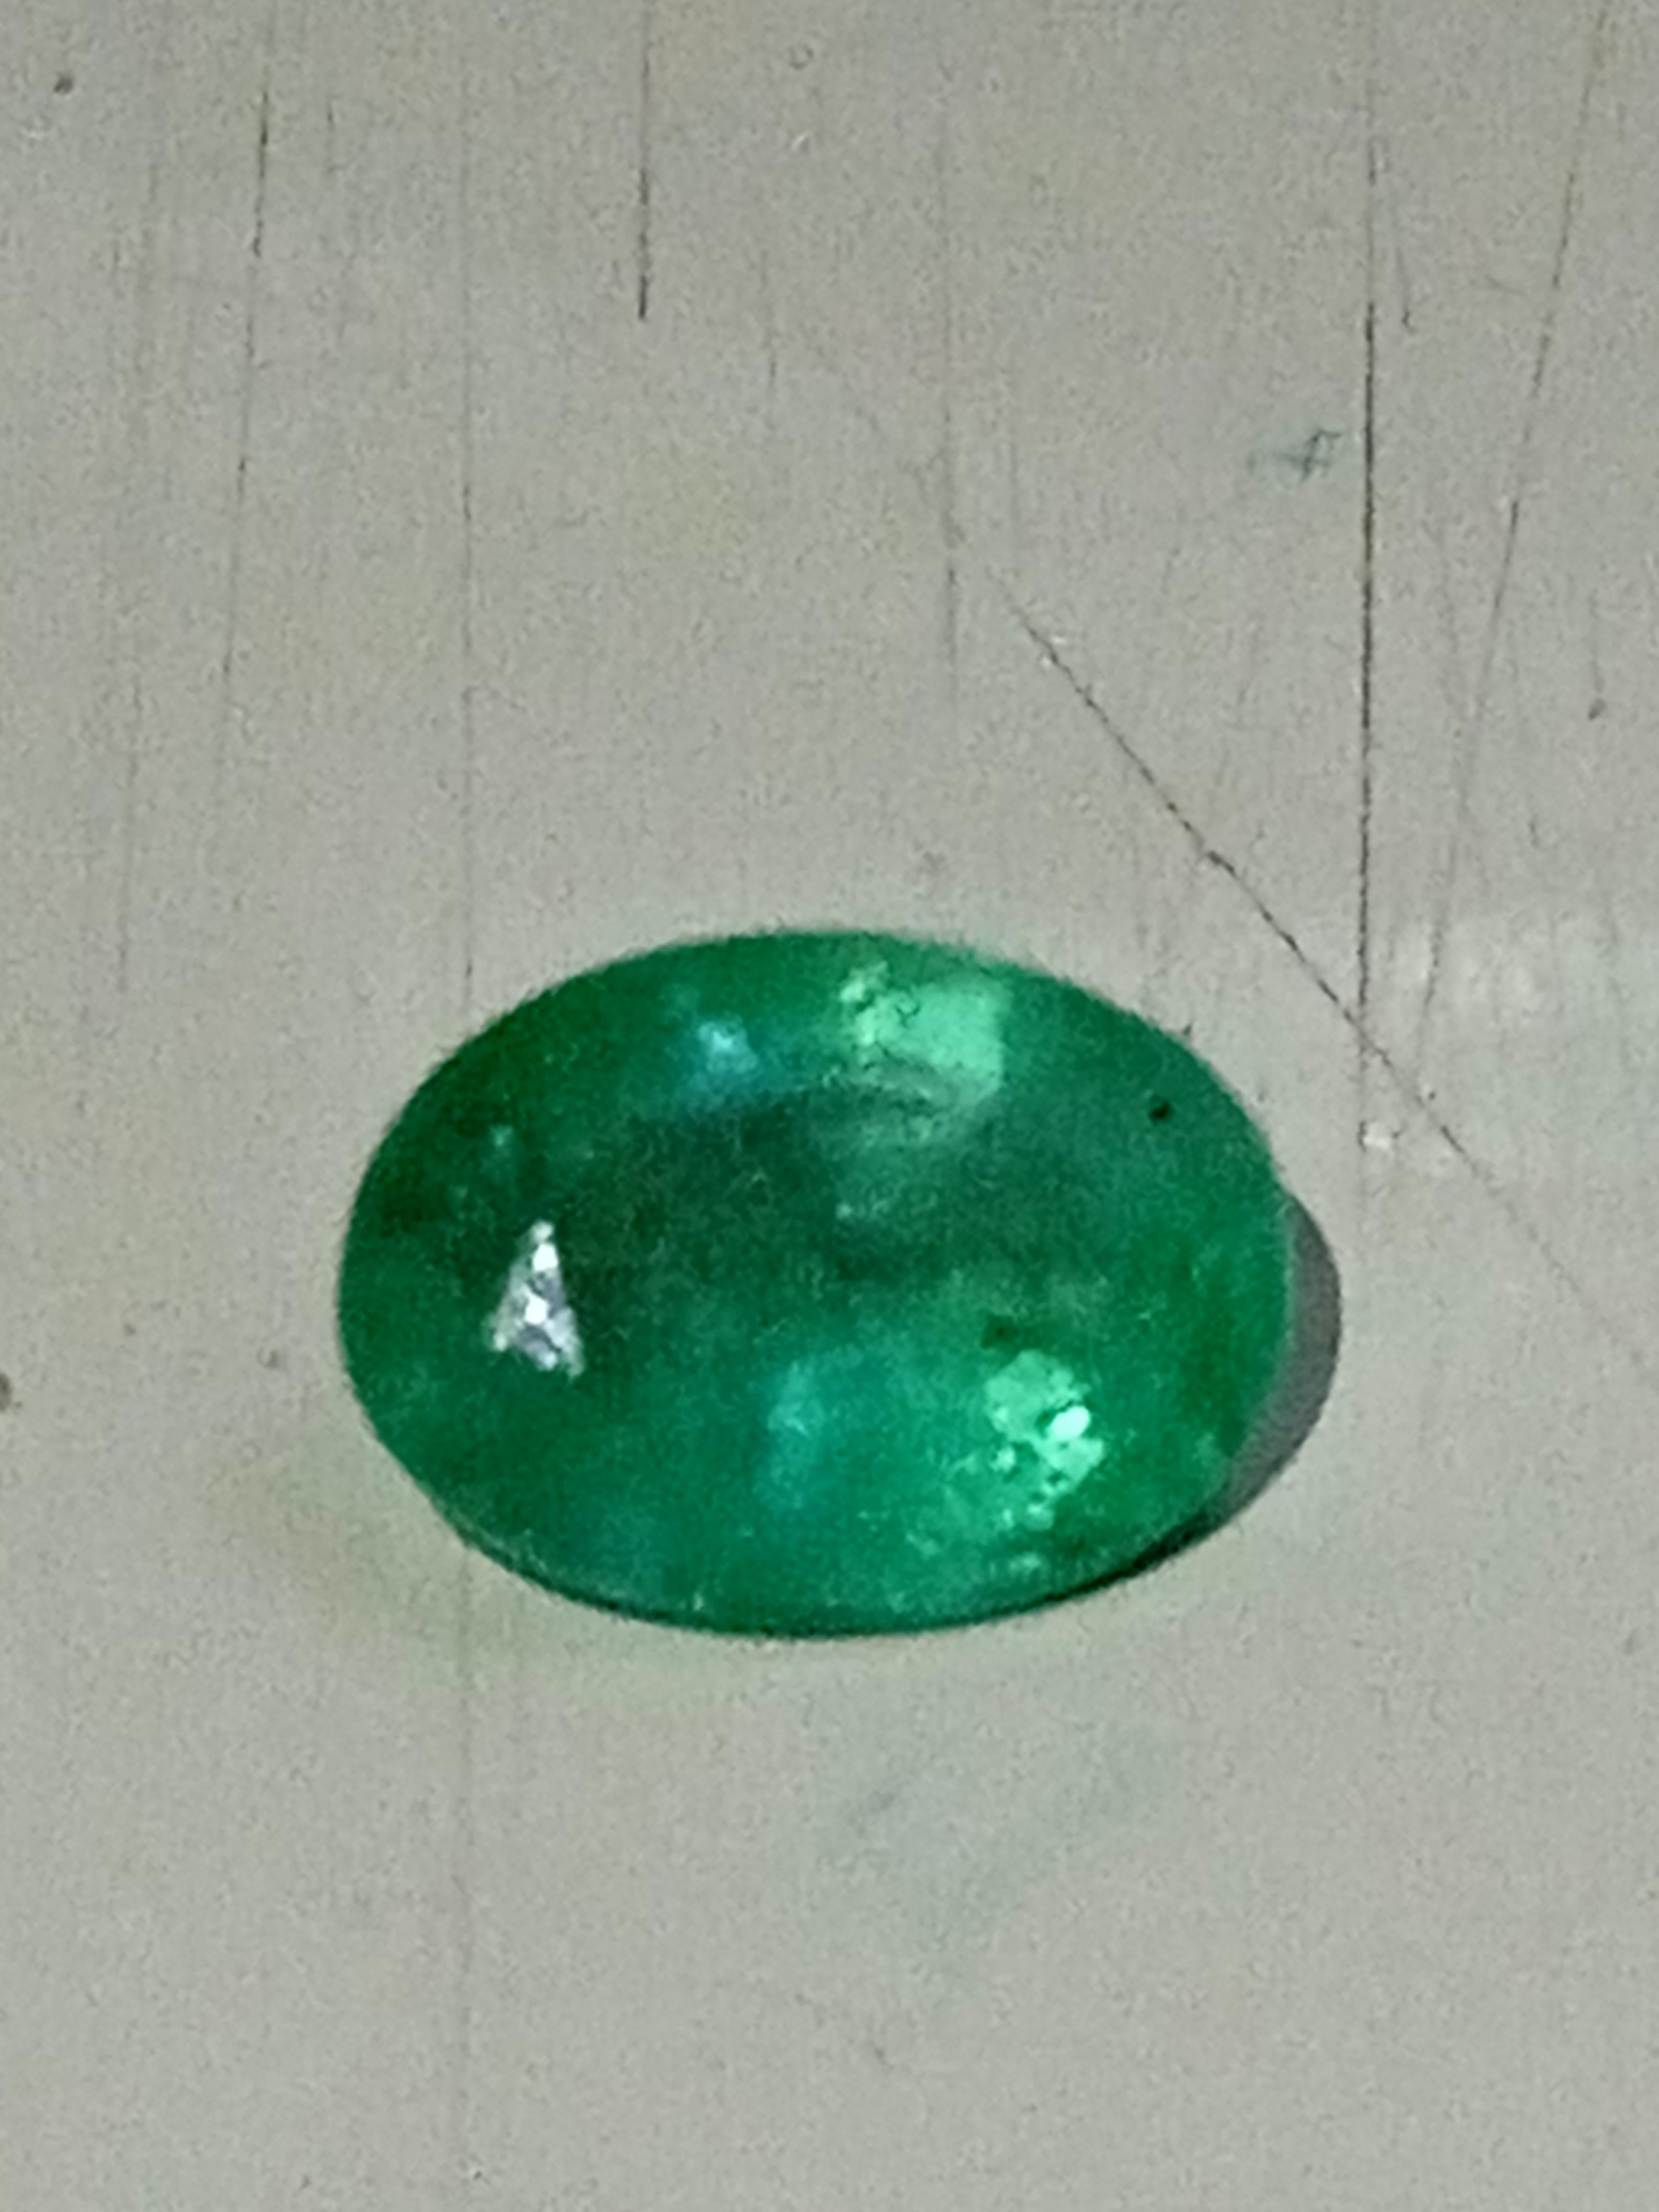 Natural Zambia emerald 1.44 carat - Sculpture by Unknown